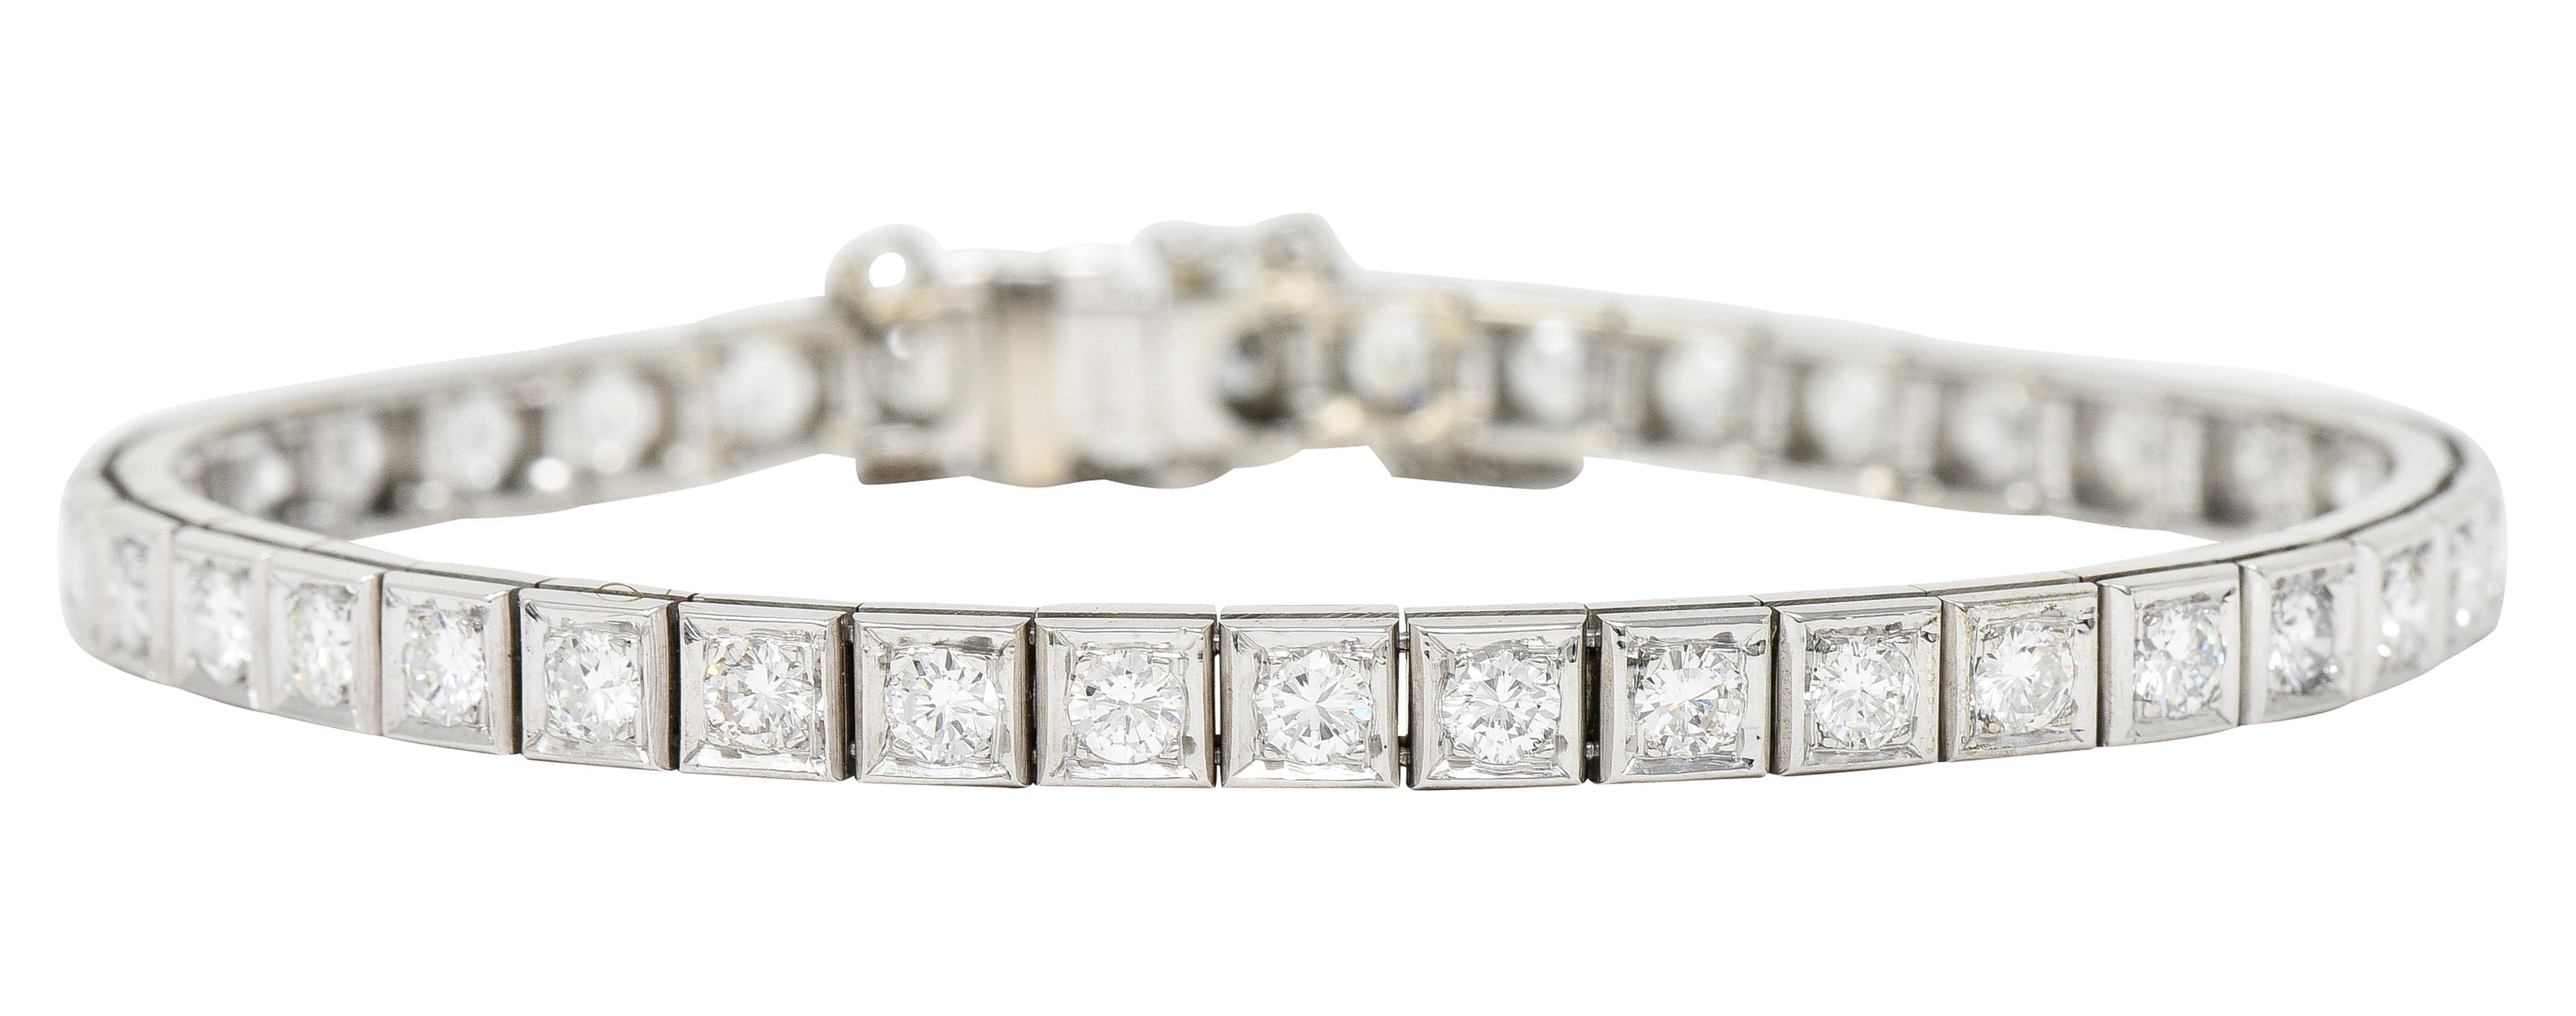 Line bracelet is comprised of articulated square form links. Each set with a round brilliant cut diamond. Weighing in total approximately 4.00 carats - H/I color with primarily VS2 to SI1 clarity.Completed by a concealed clasp with fold-over safety